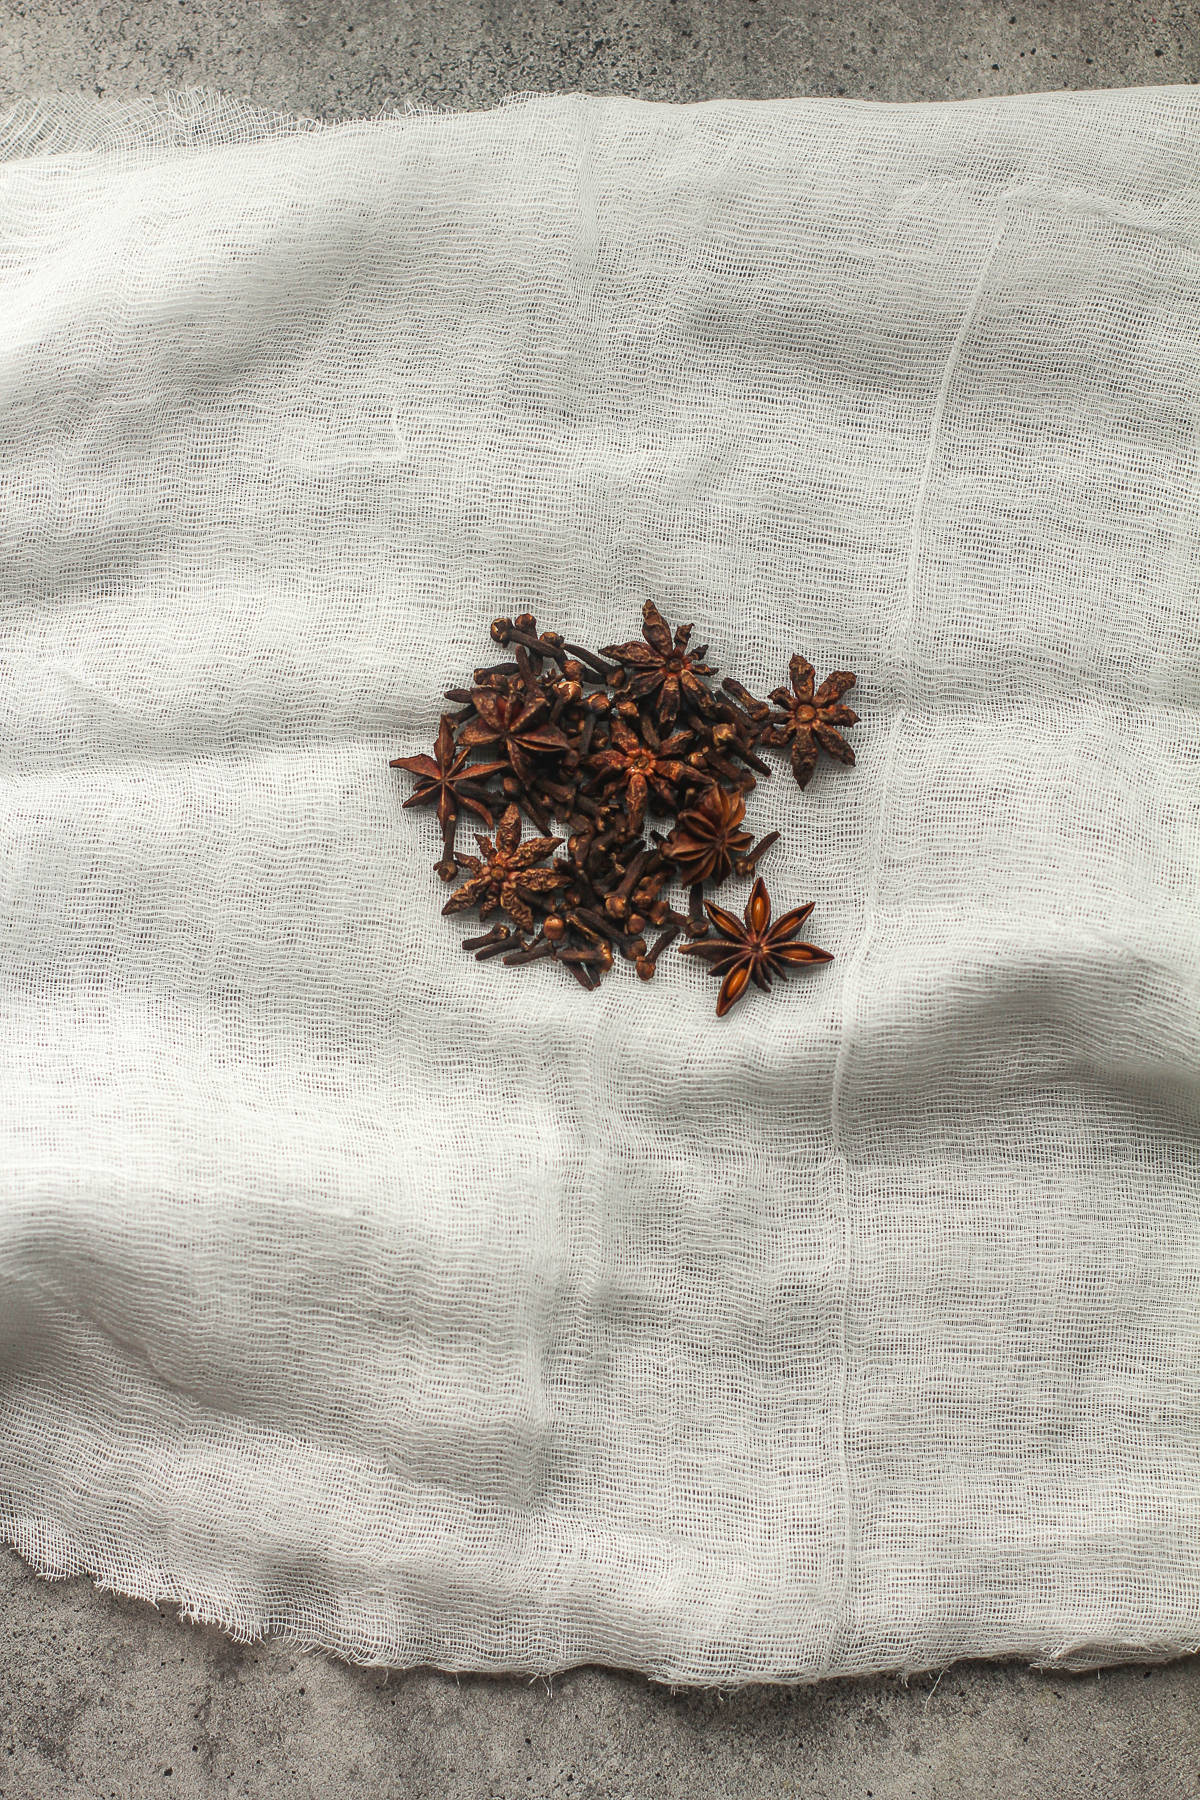 A cheesecloth of cloves and star anise.